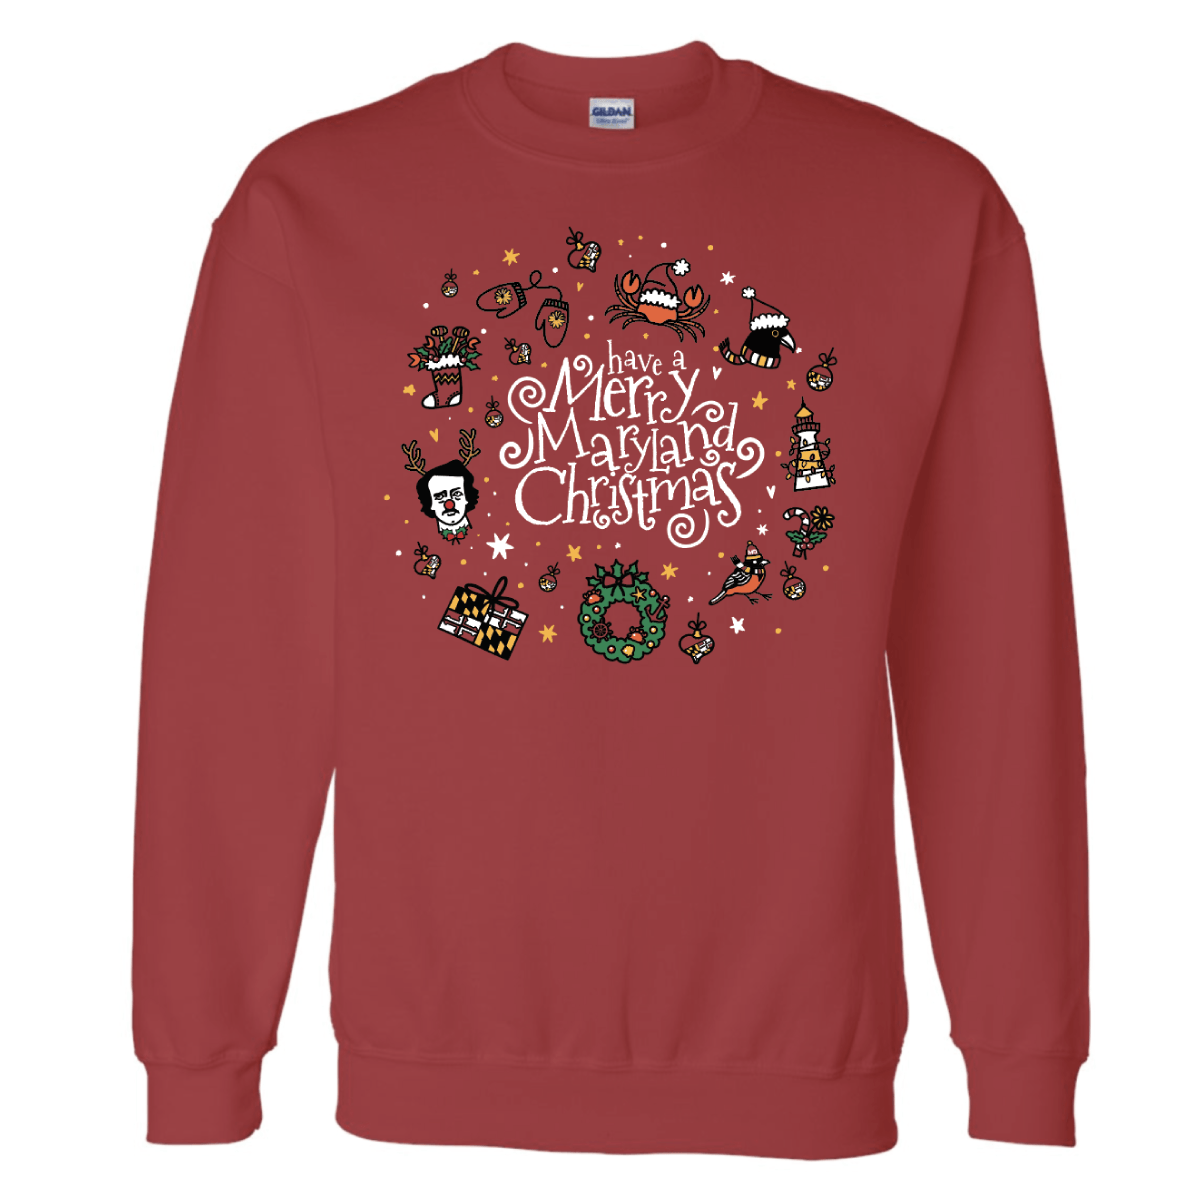 Merry Maryland Christmas Icons (Red) / Crew Sweatshirt - Route One Apparel